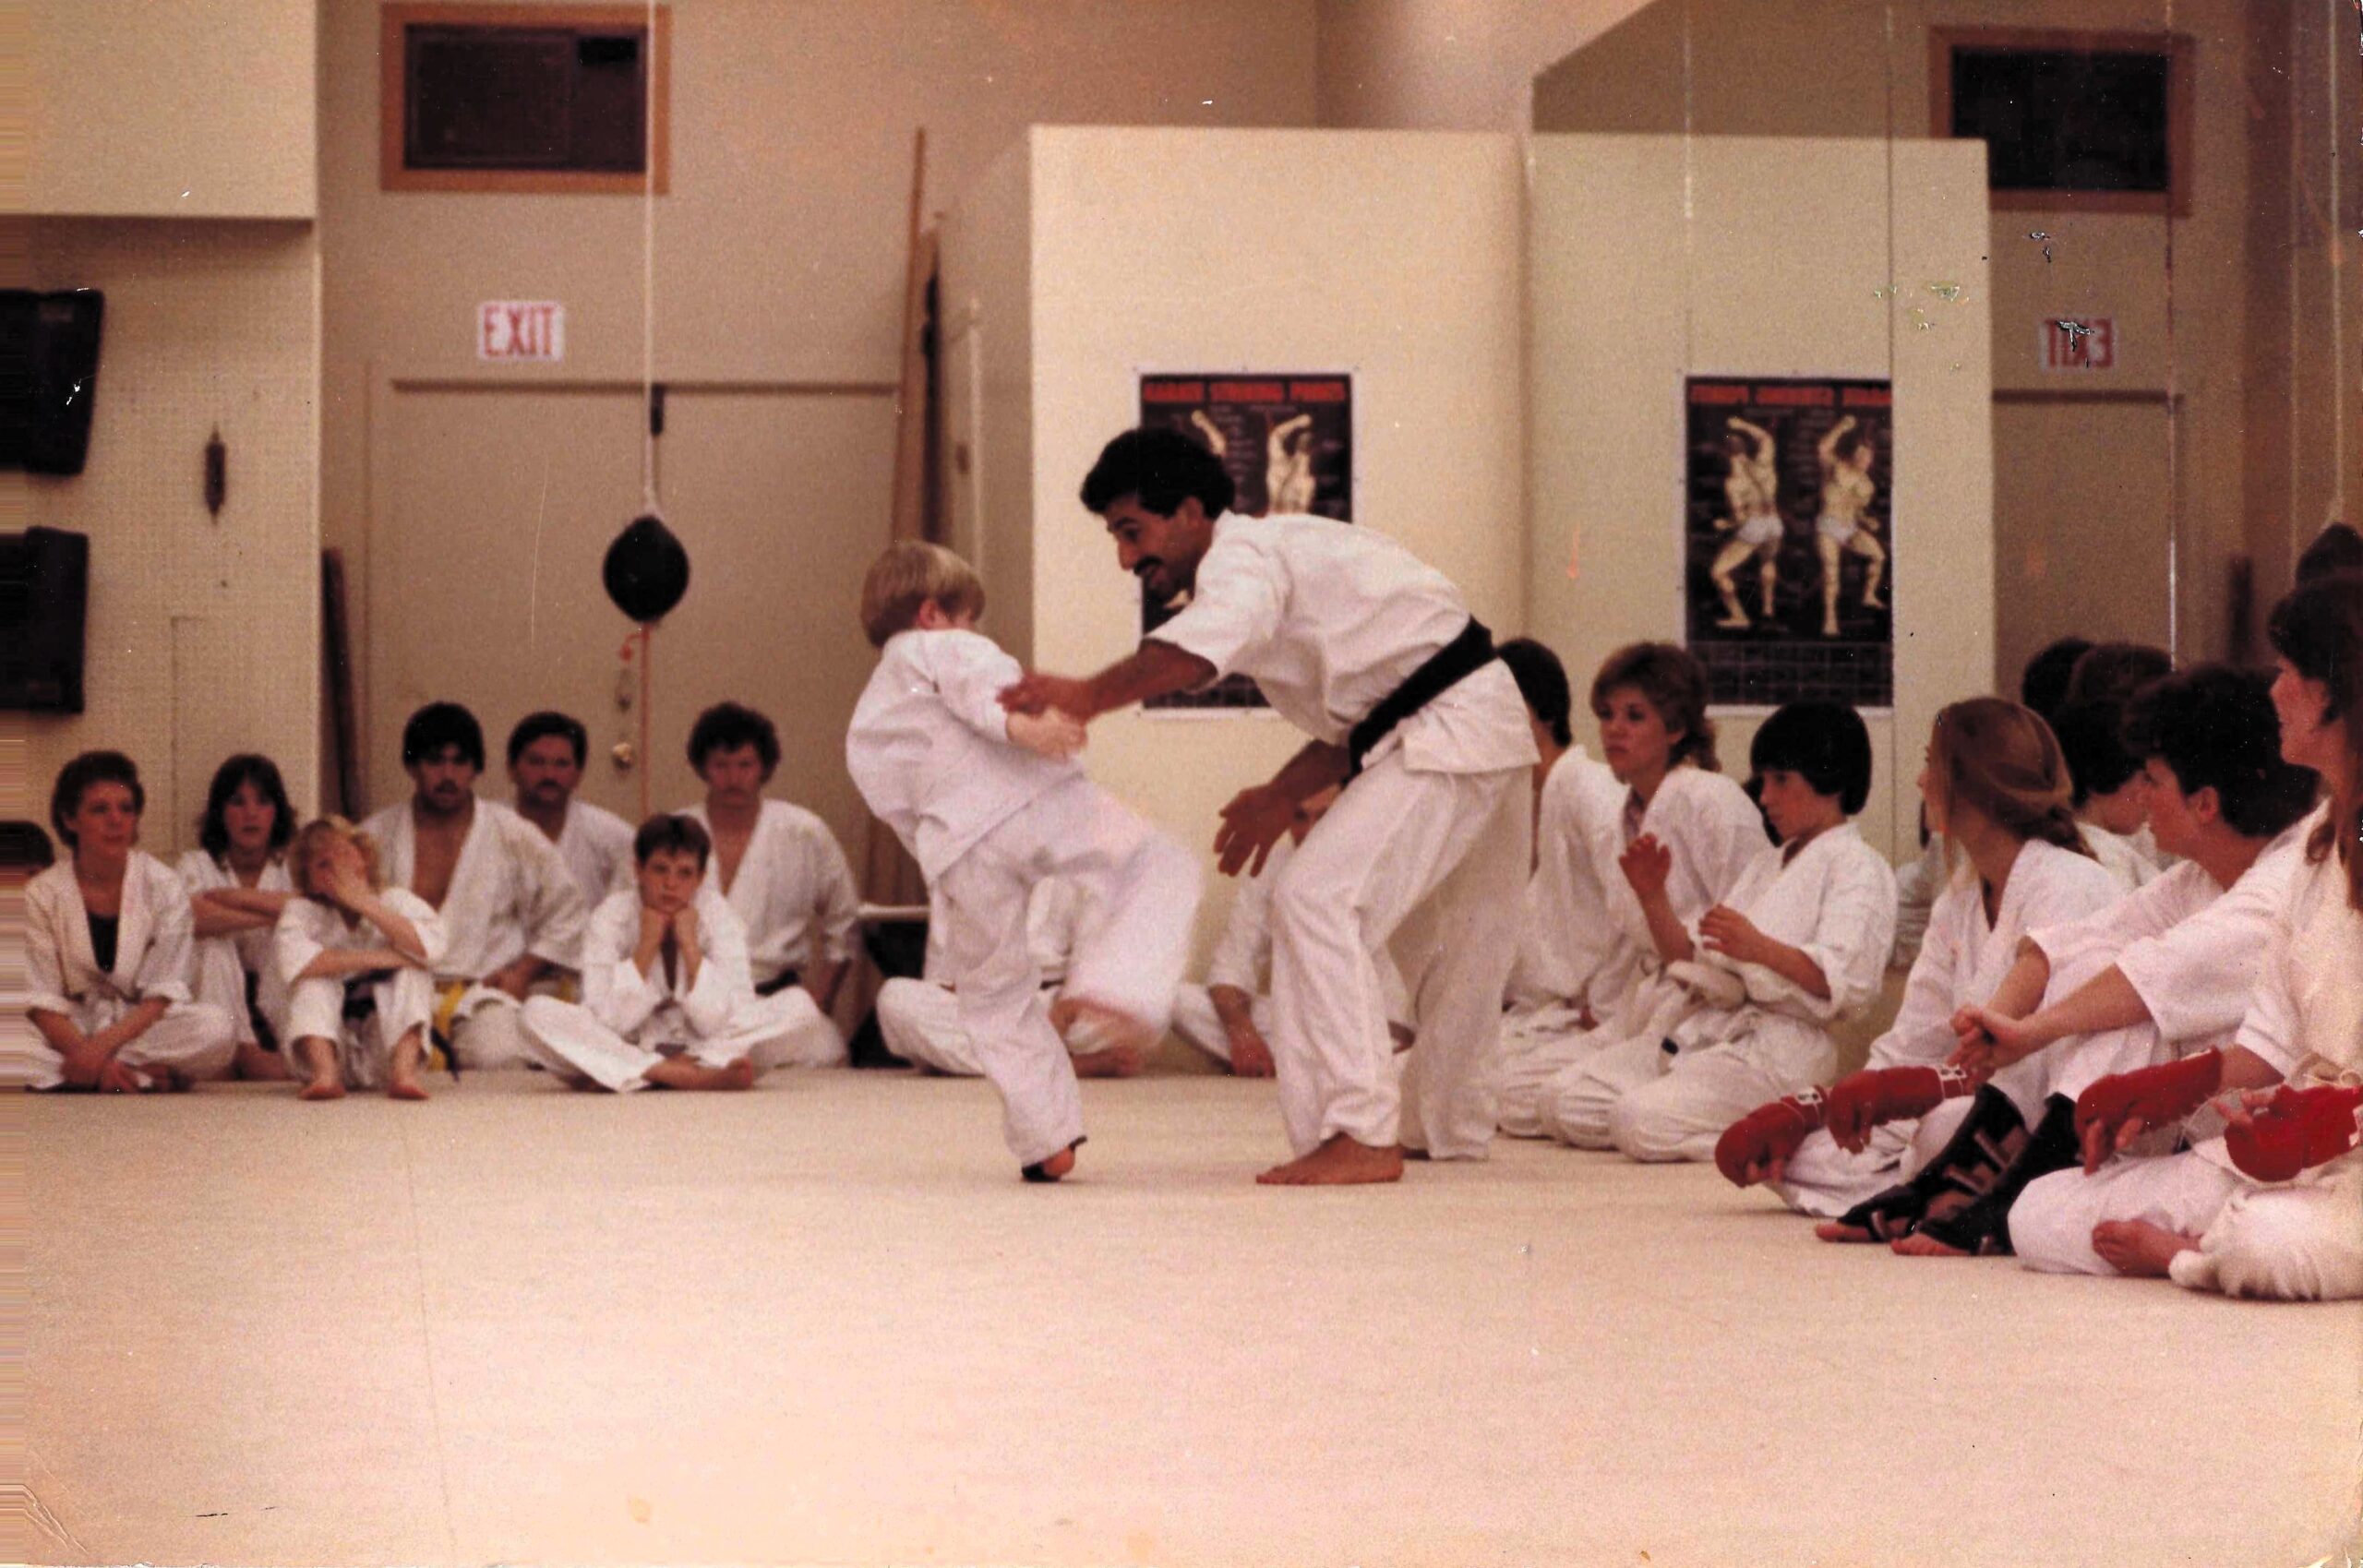 A man with dark hair and mustache sparring with a small boy.